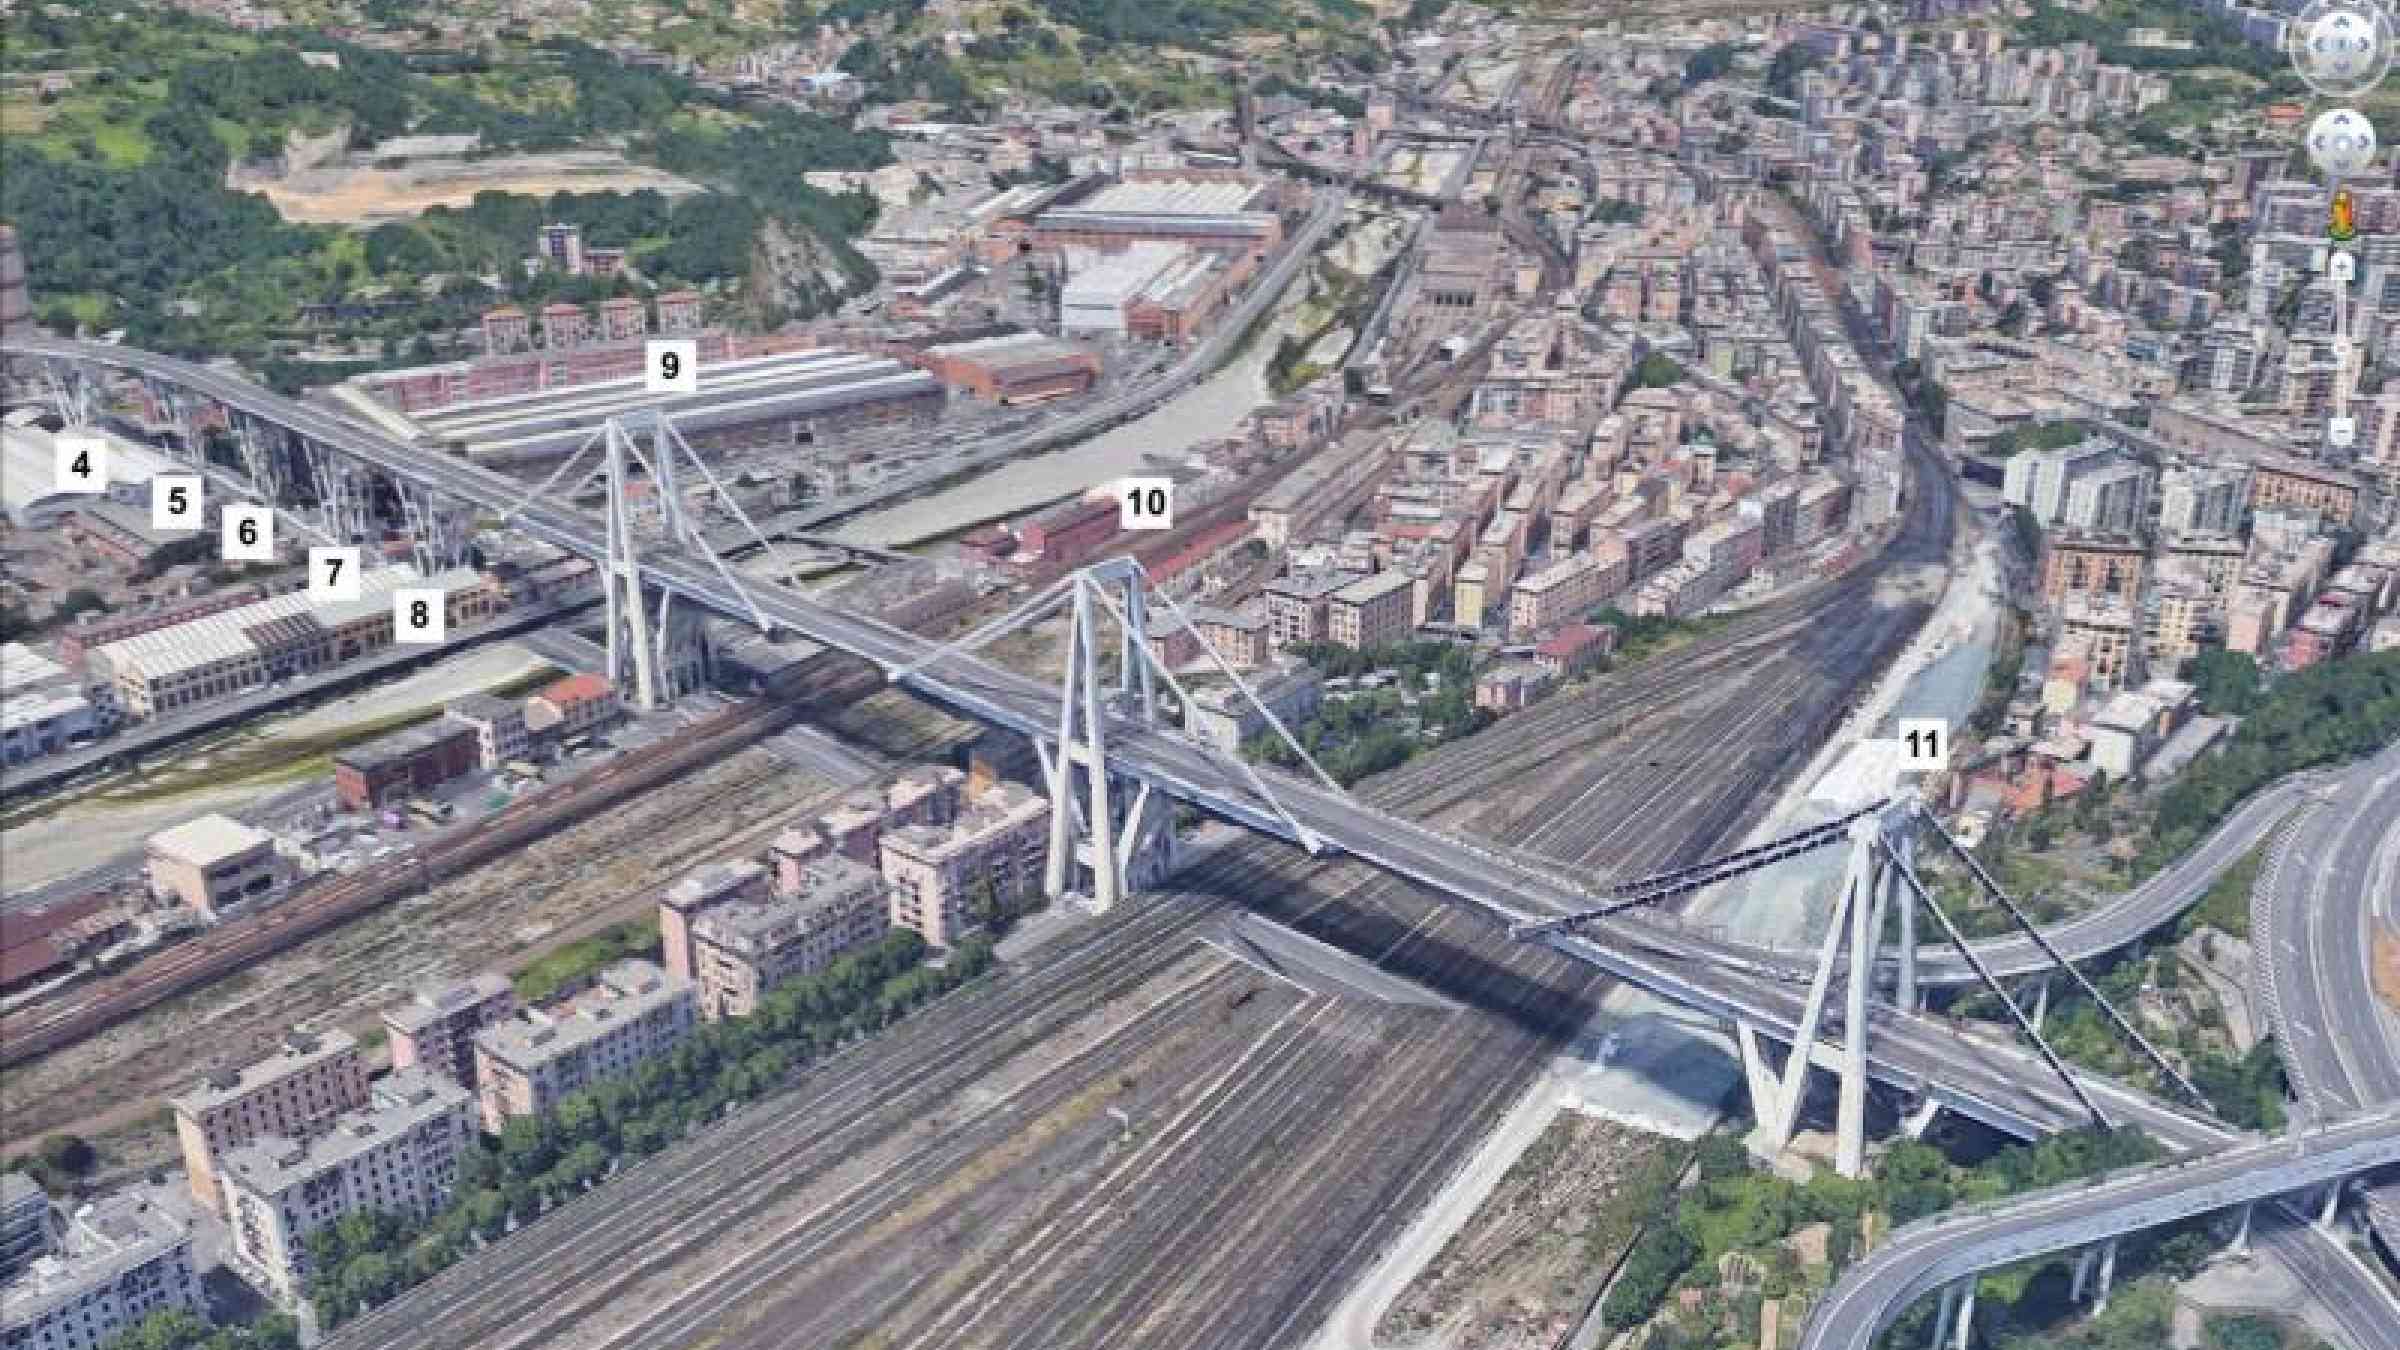 A satellite view of the Morandi Bridge in Genoa, Italy, prior to its August 2018 collapse. The numbers identify key bridge components. Numbers 4 through 8 correspond to the bridge's V-shaped piers (from West to East). Numbers 9 through 11 correspond to three independent balance systems on the bridge. In the annotated version, the black arrows identify areas of change based on data from the Cosmo-SkyMed satellite constellation. (Image source: NASA/JPL-Caltech/Google)